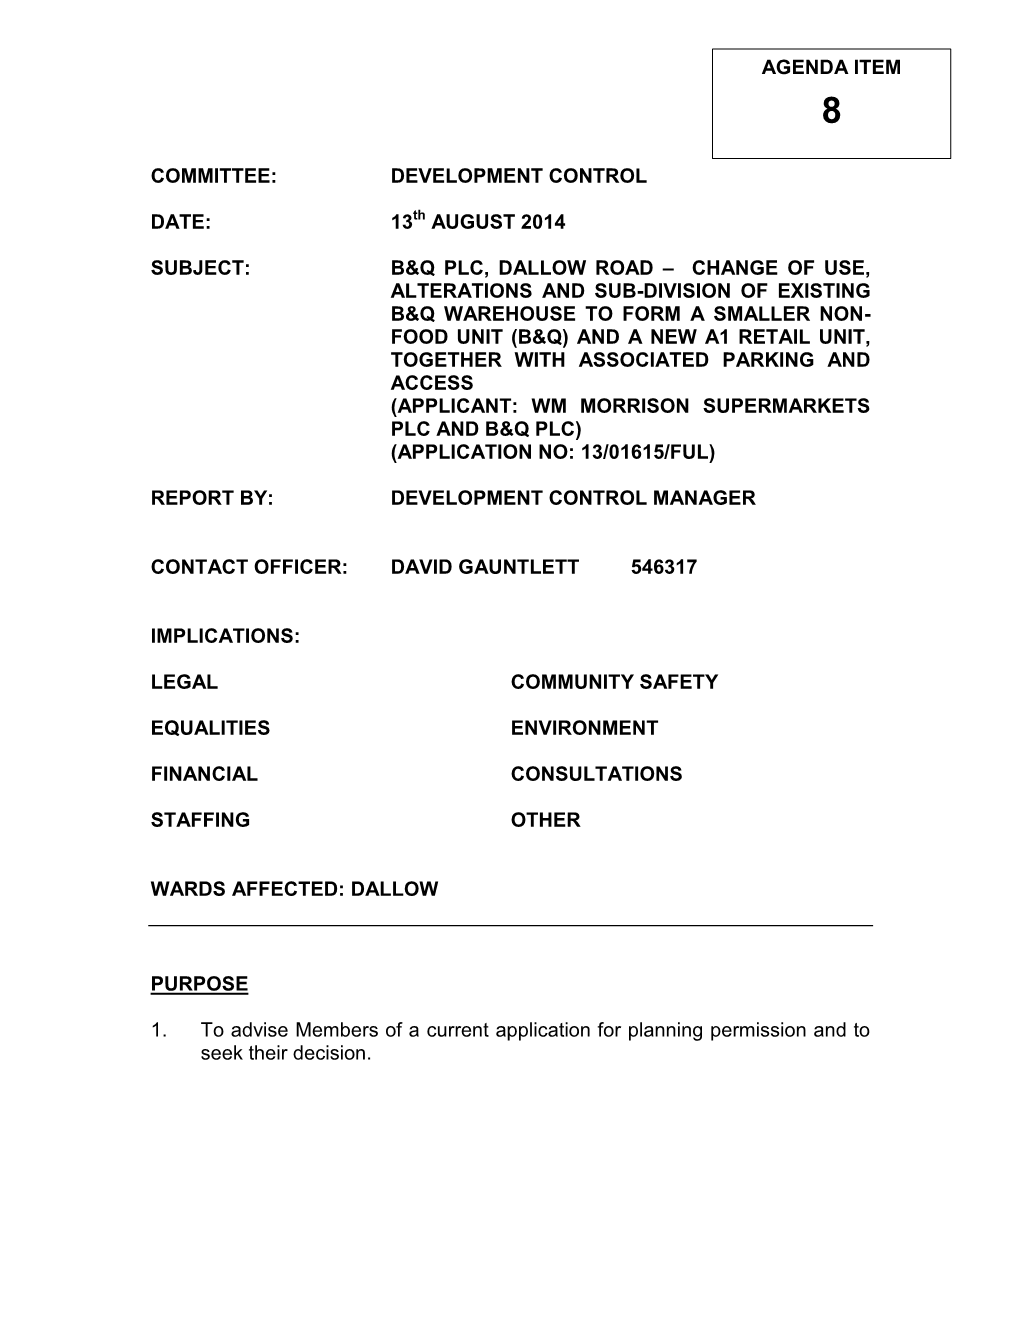 Committee: Development Control Date: 13 August 2014 Subject: B&Q Plc, Dallow Road – Change of Use, Alterations and Sub-D